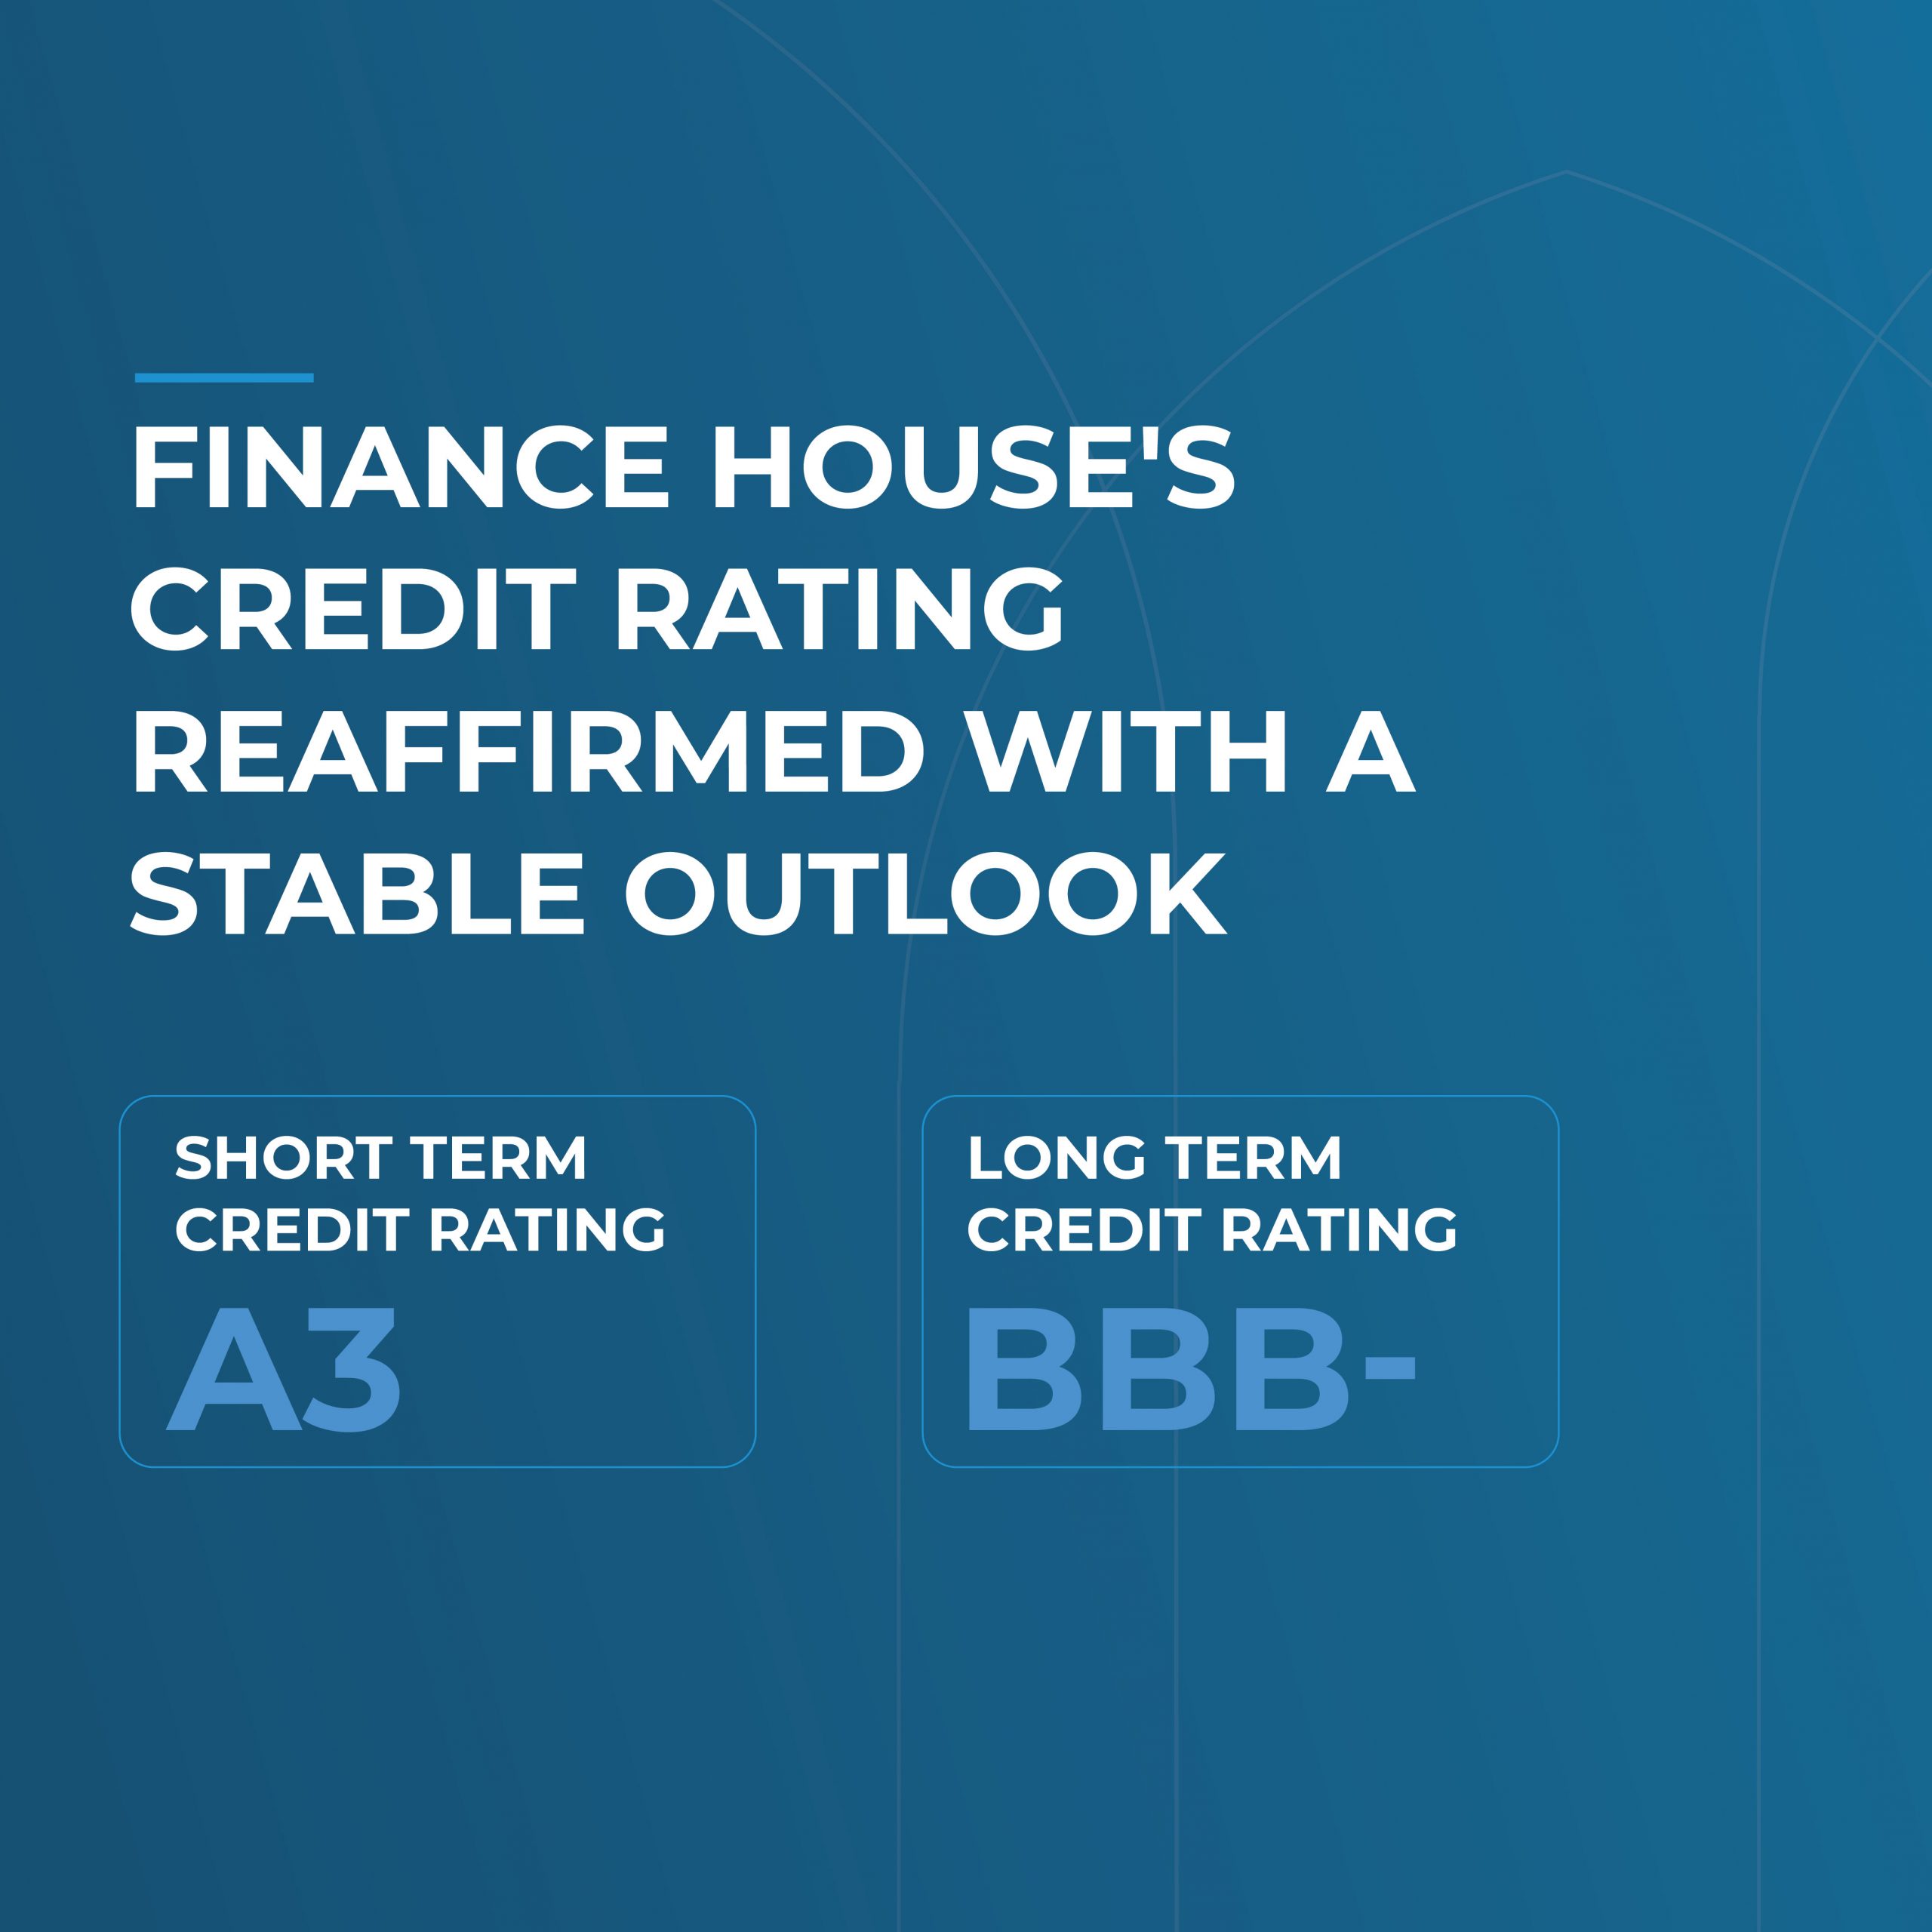 Finance House’s Investment Grade Credit Ratings Reaffirmed with a Stable Outlook